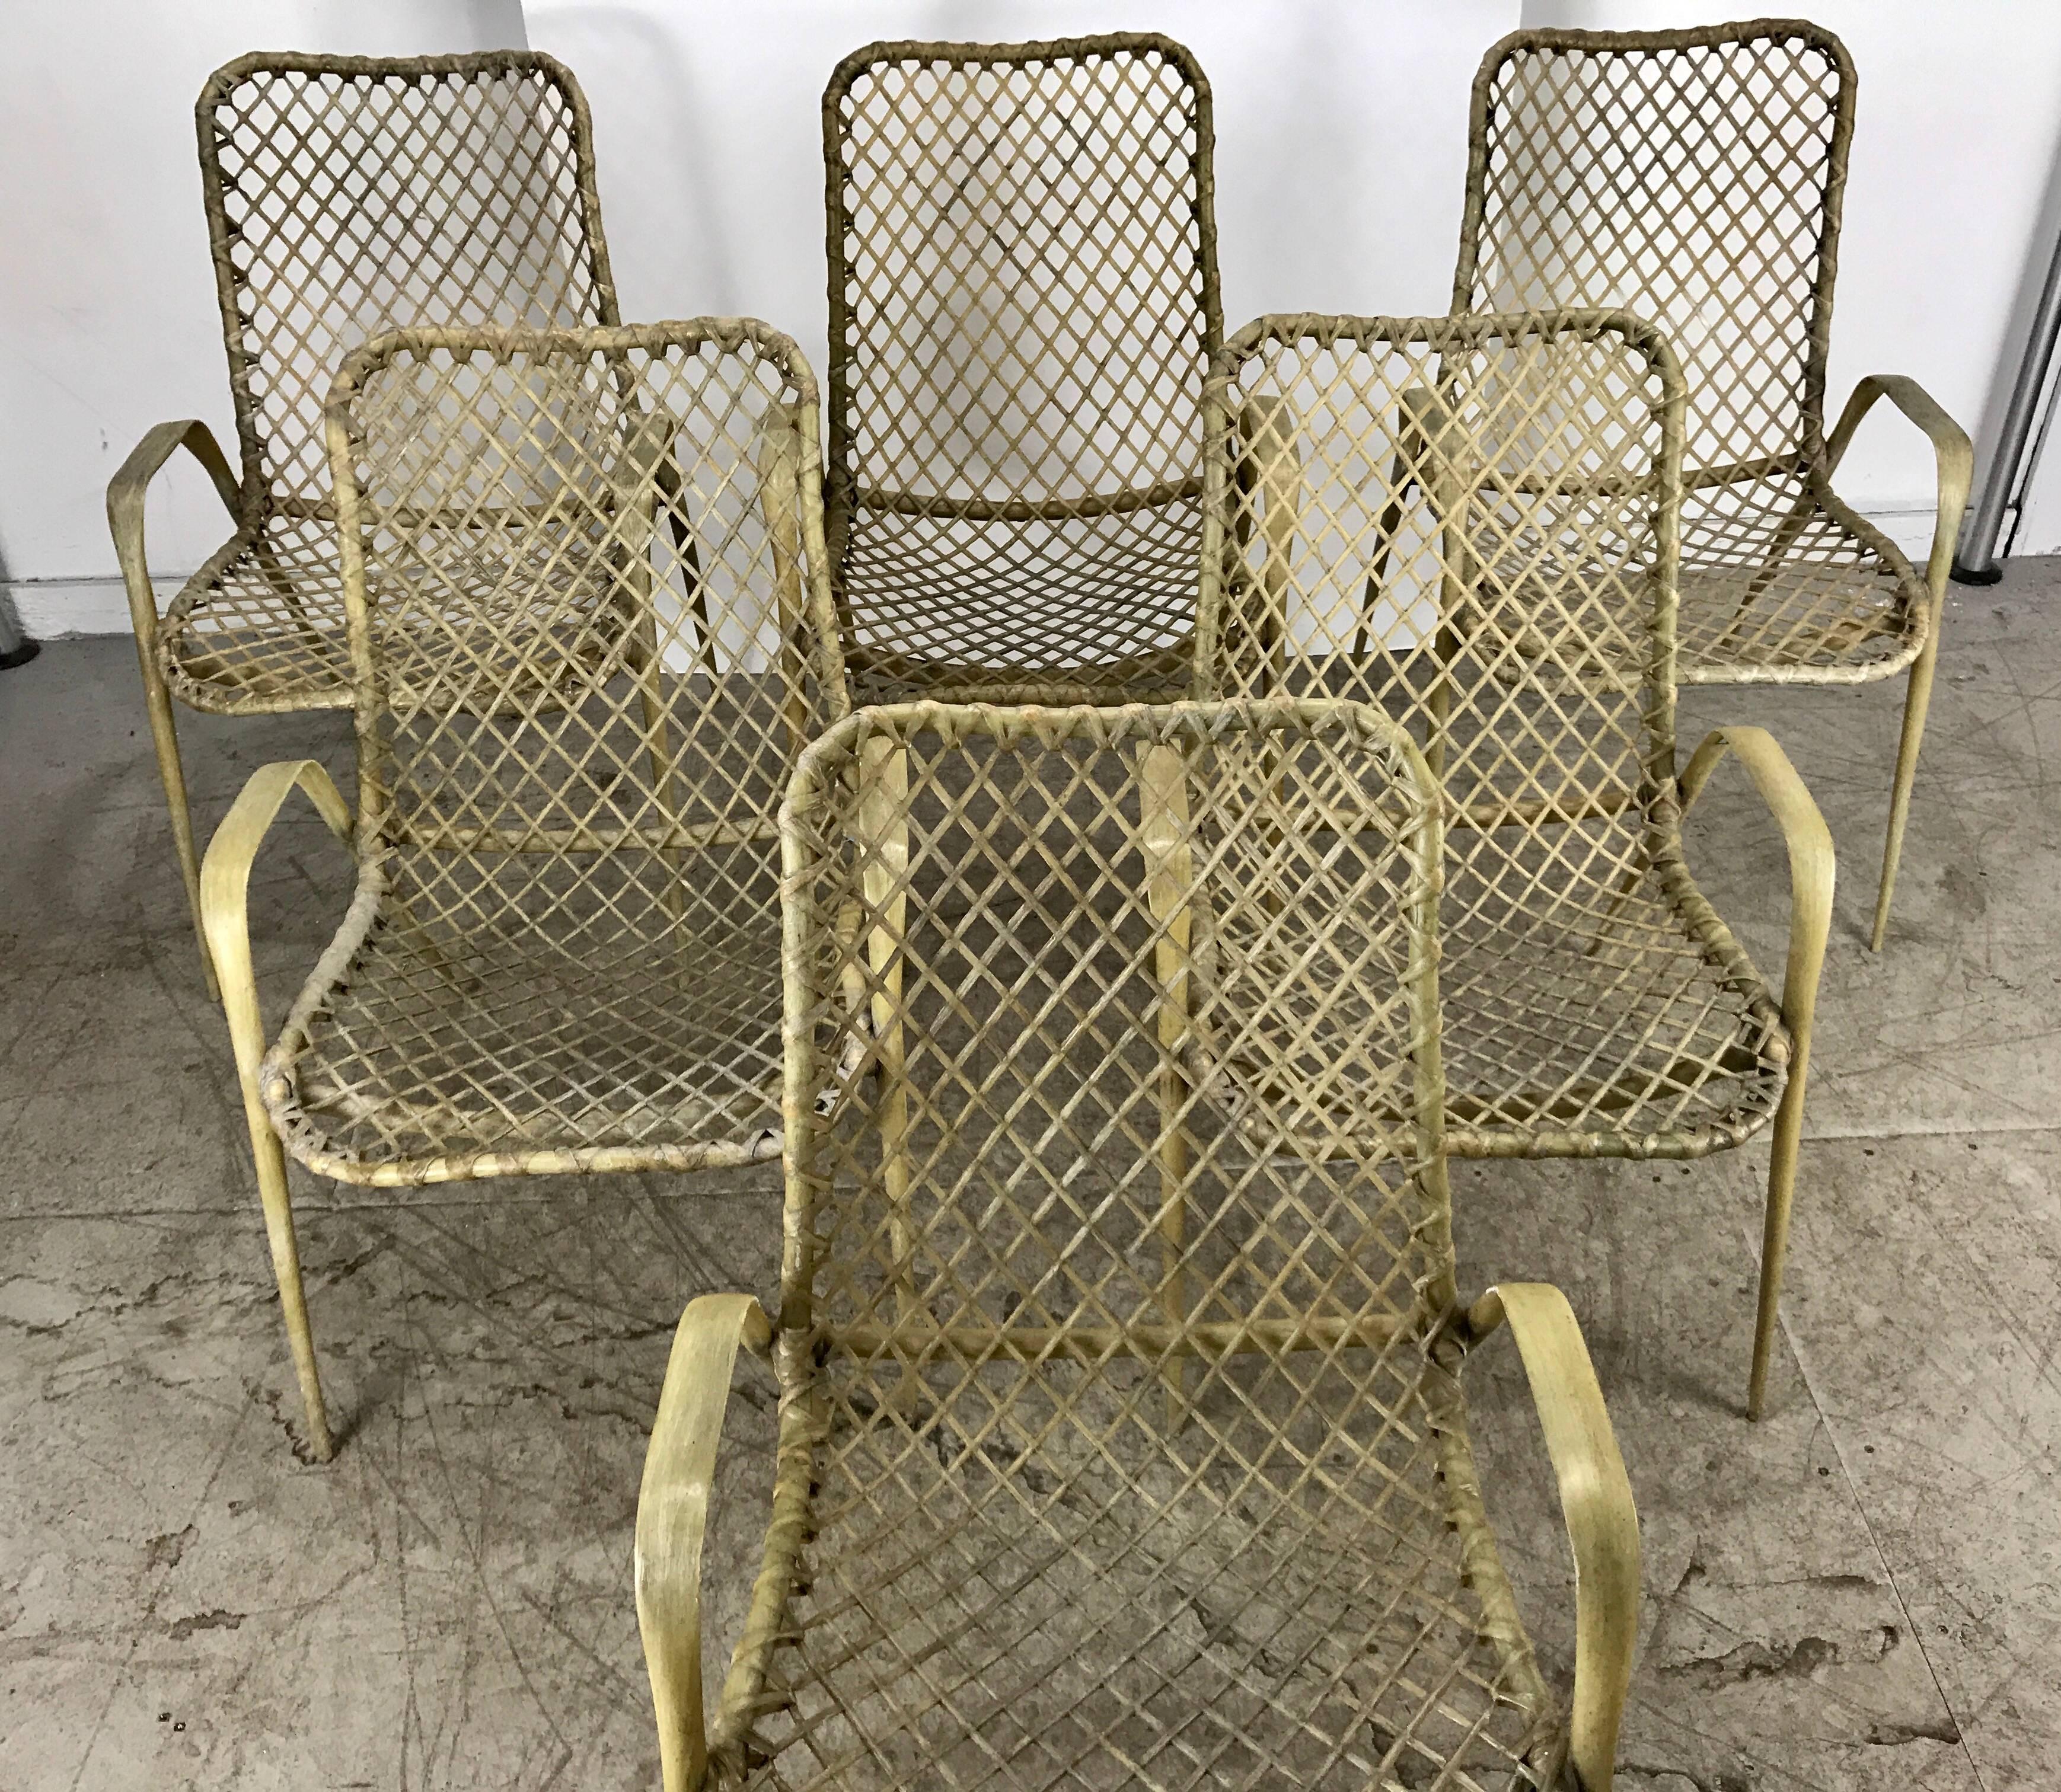 Set of six resin string chairs, modernist indoor / outdoor by Troy Sunshade, classic modernist design. Extremely comfortable. Hand delivery available to New York City or anywhere enroute from Buffalo New York.